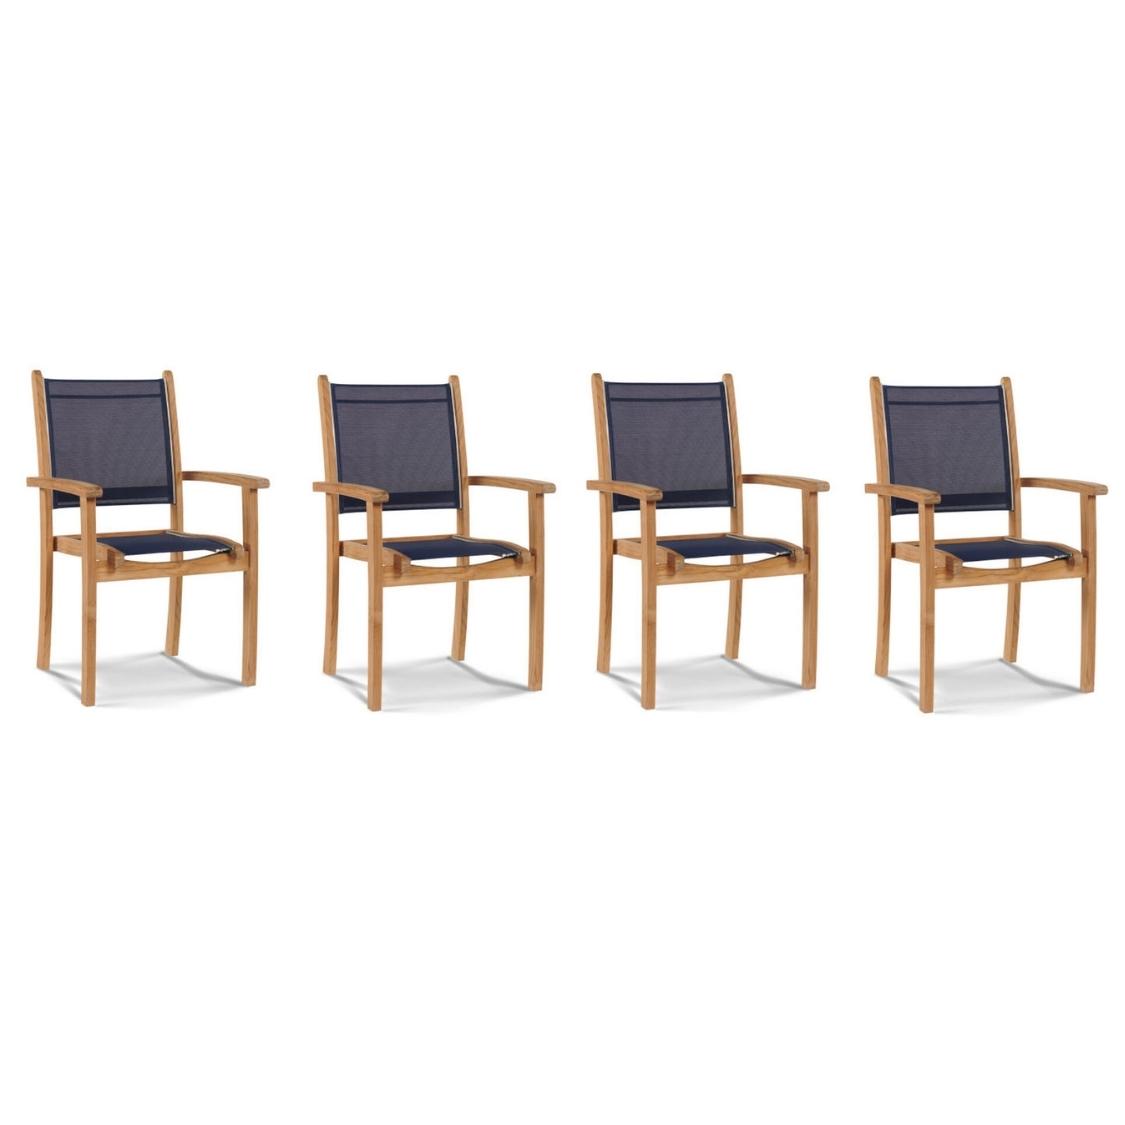 Pearl Stacking Teak Outdoor Dining Armchair (Set of 4)